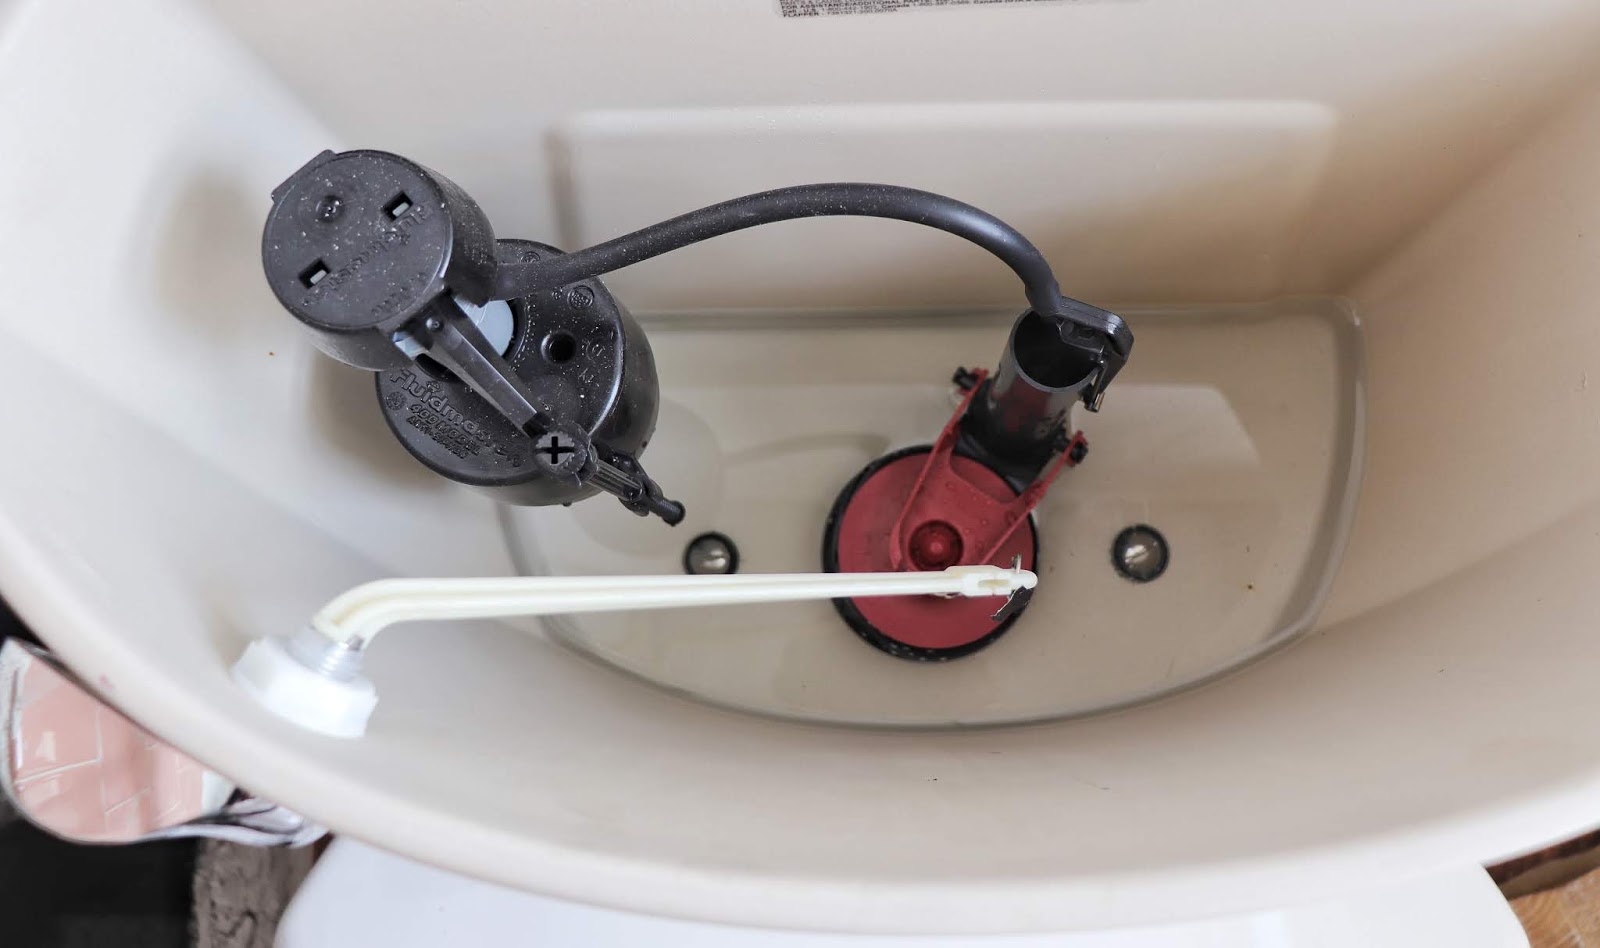 How to Replace a Toilet Handle